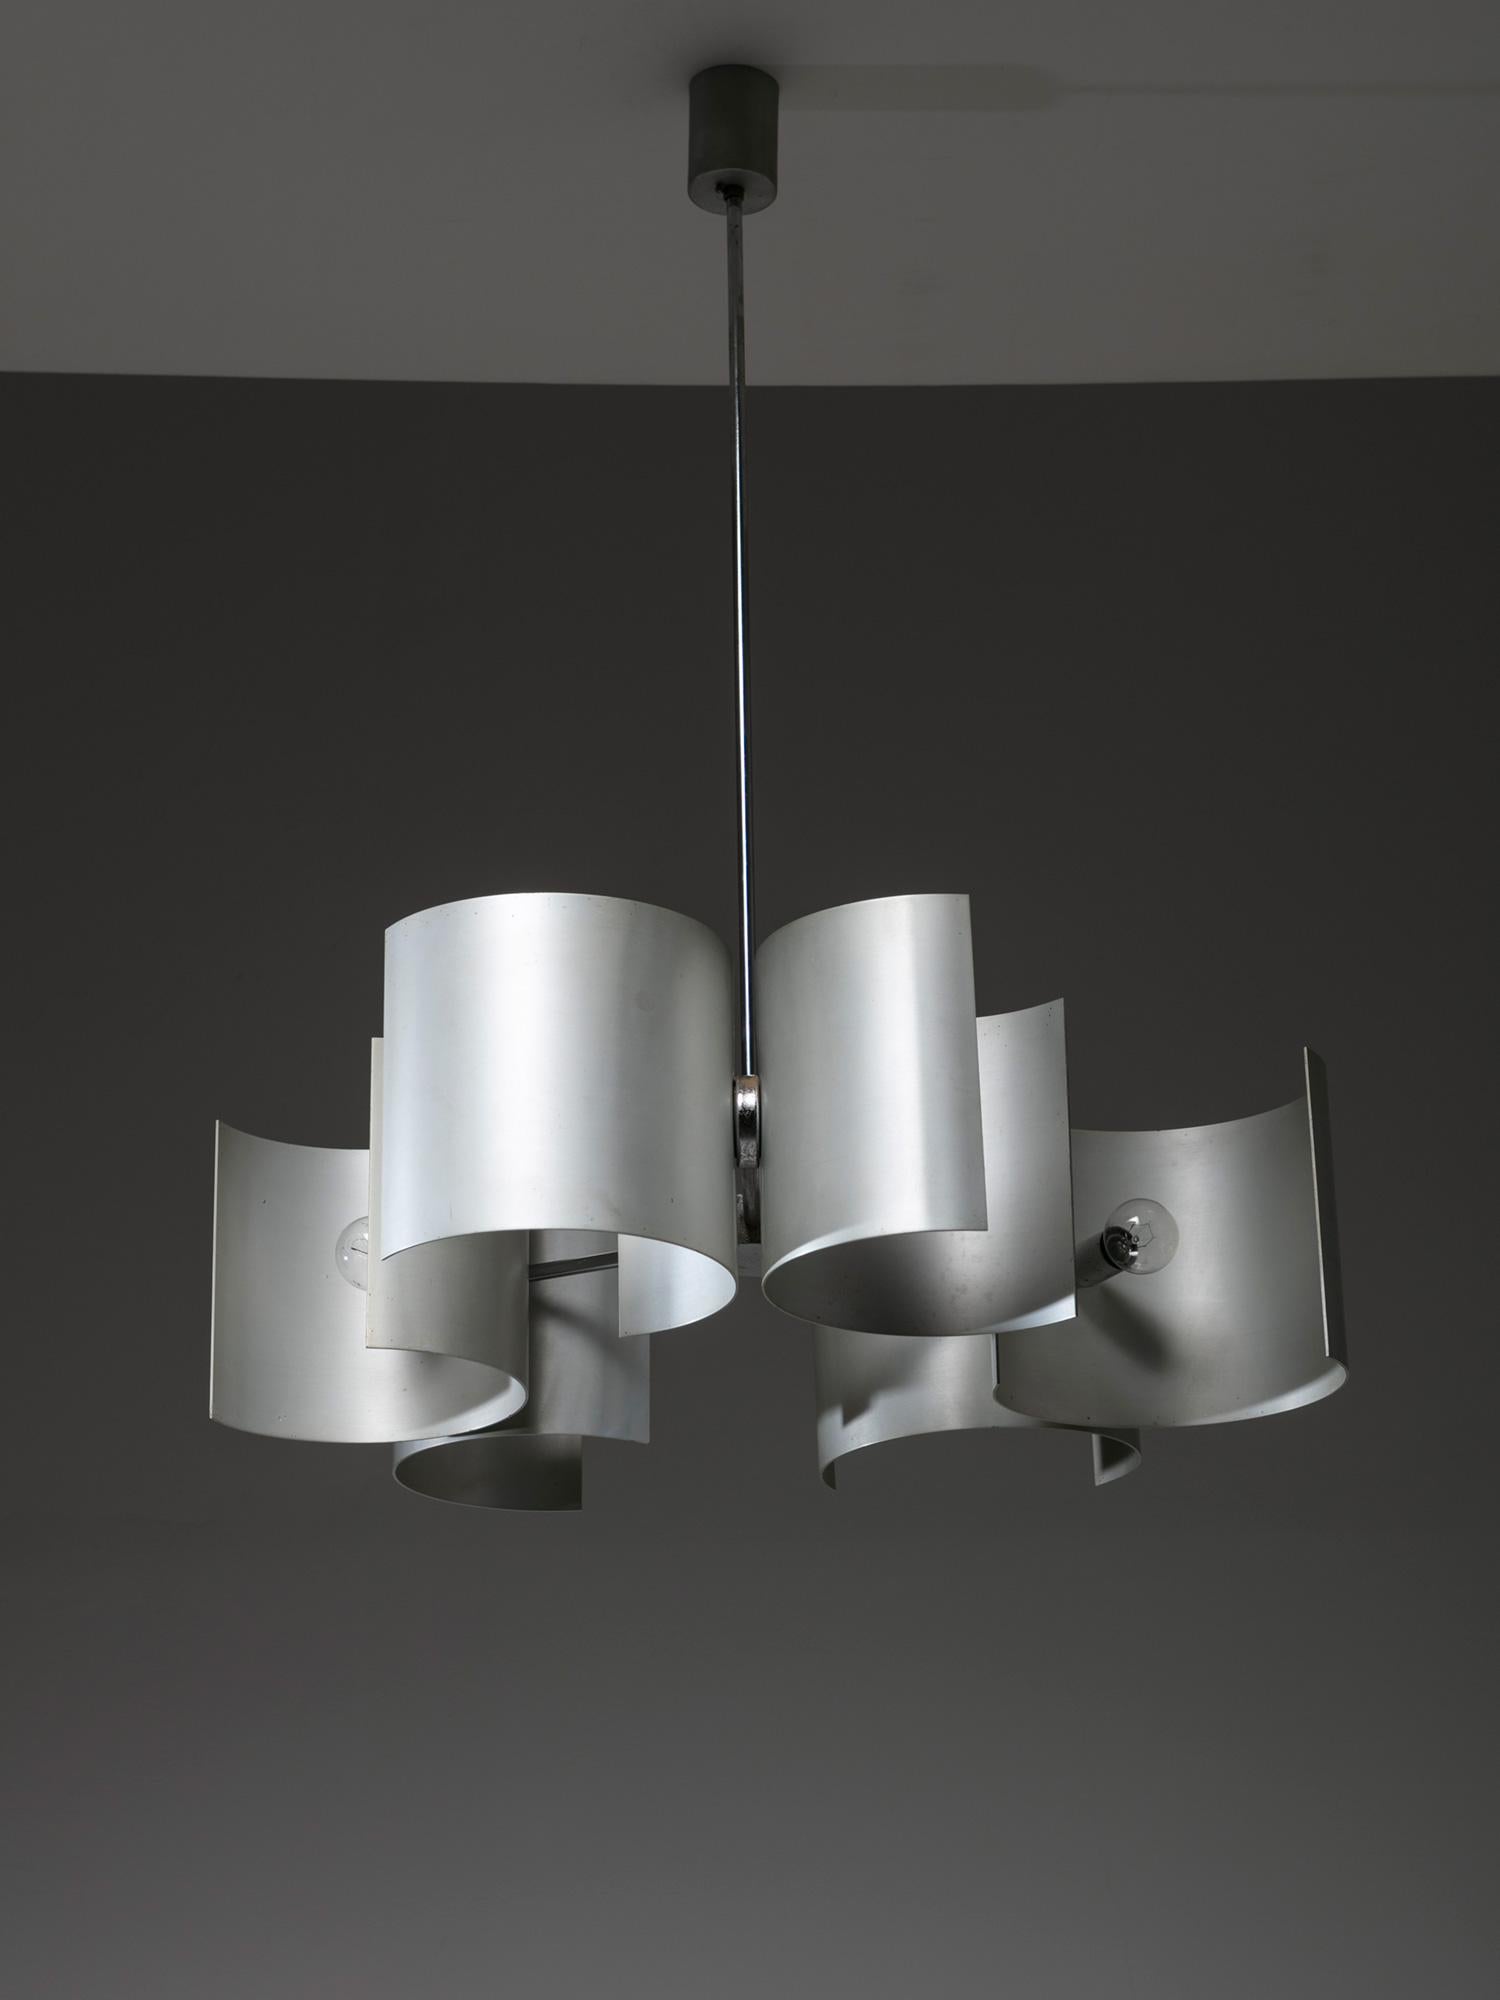 Rare aluminum Tripolo chandelier by Giuliano Ceari for Sormani.
Each shade can rotate along its central axis.
Also available a second piece.